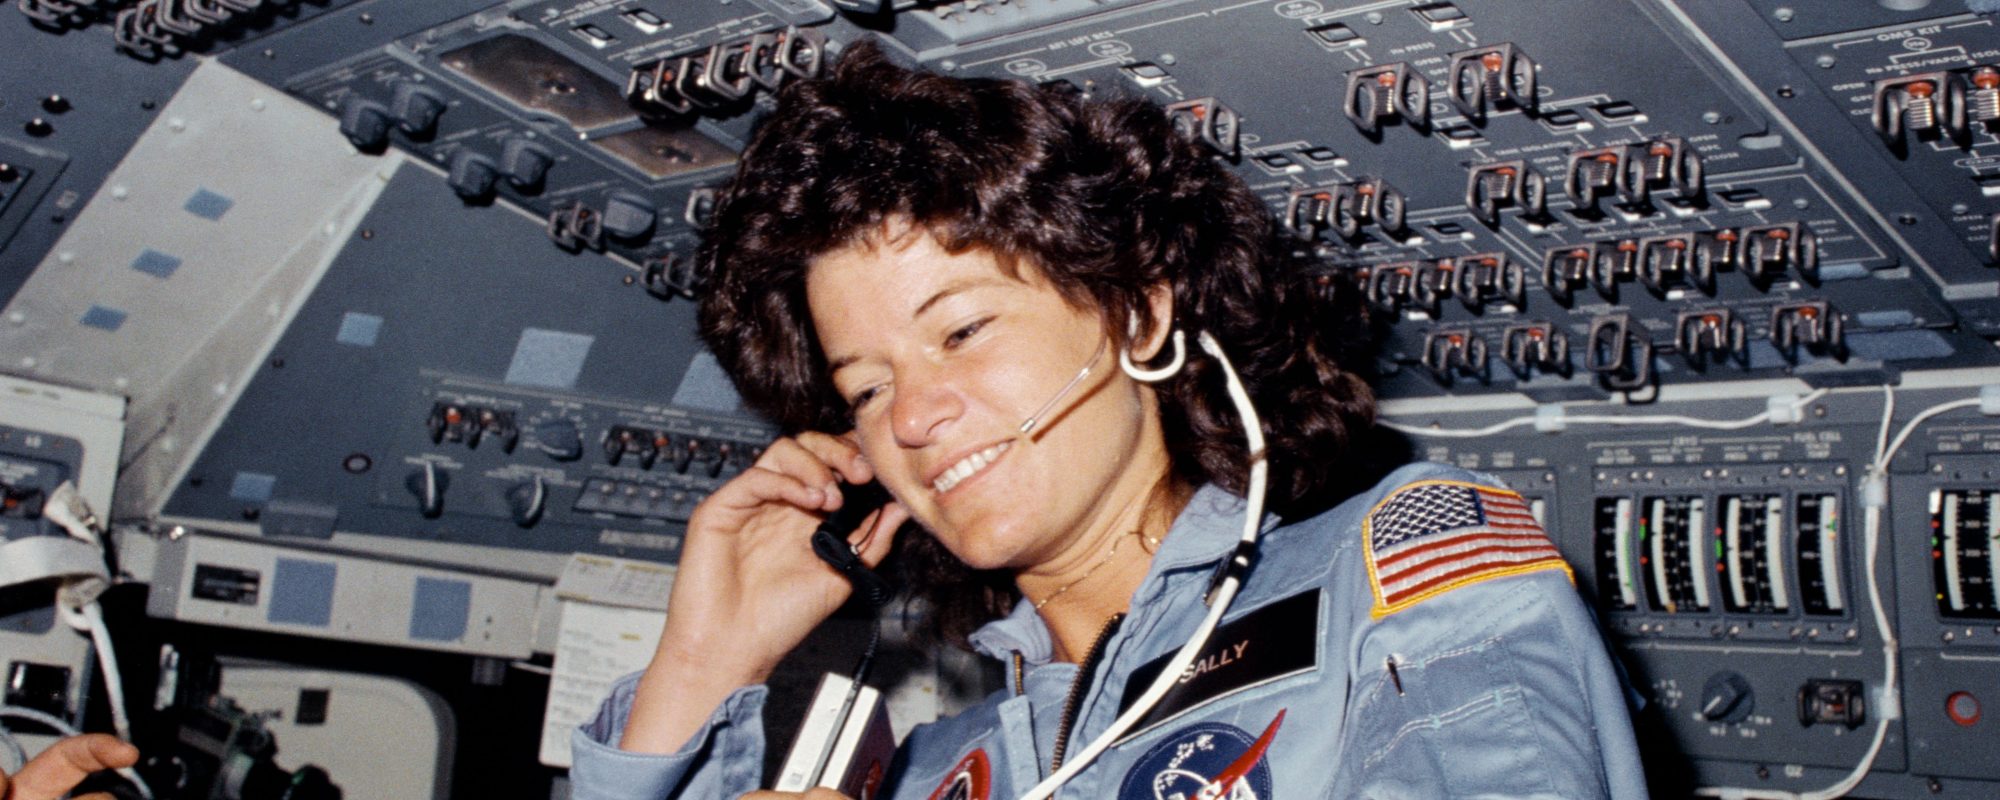 S83-35763 / STS007-02-027 (18 June 1983) --- Seen on the flight deck of the space shuttle Challenger, astronaut Sally K. Ride, STS-7 mission specialist,  became the first American woman in space on June 18, 1983.  Photo credit: NASA